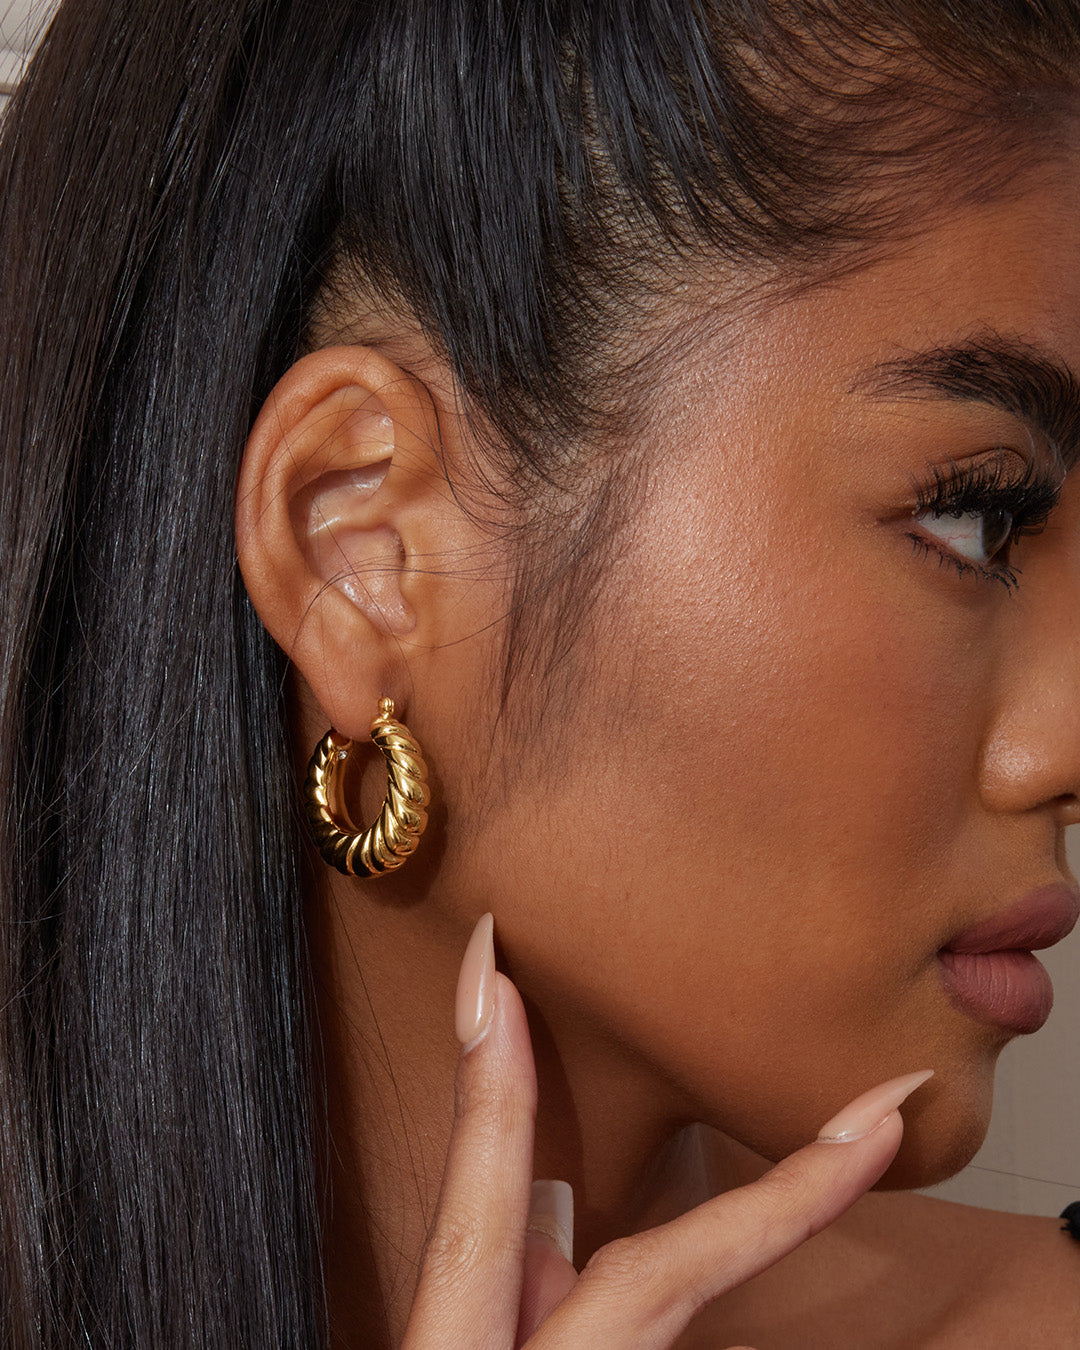 This is the product picture of classic twisted hoop earrings plated in gold in sterling silver material